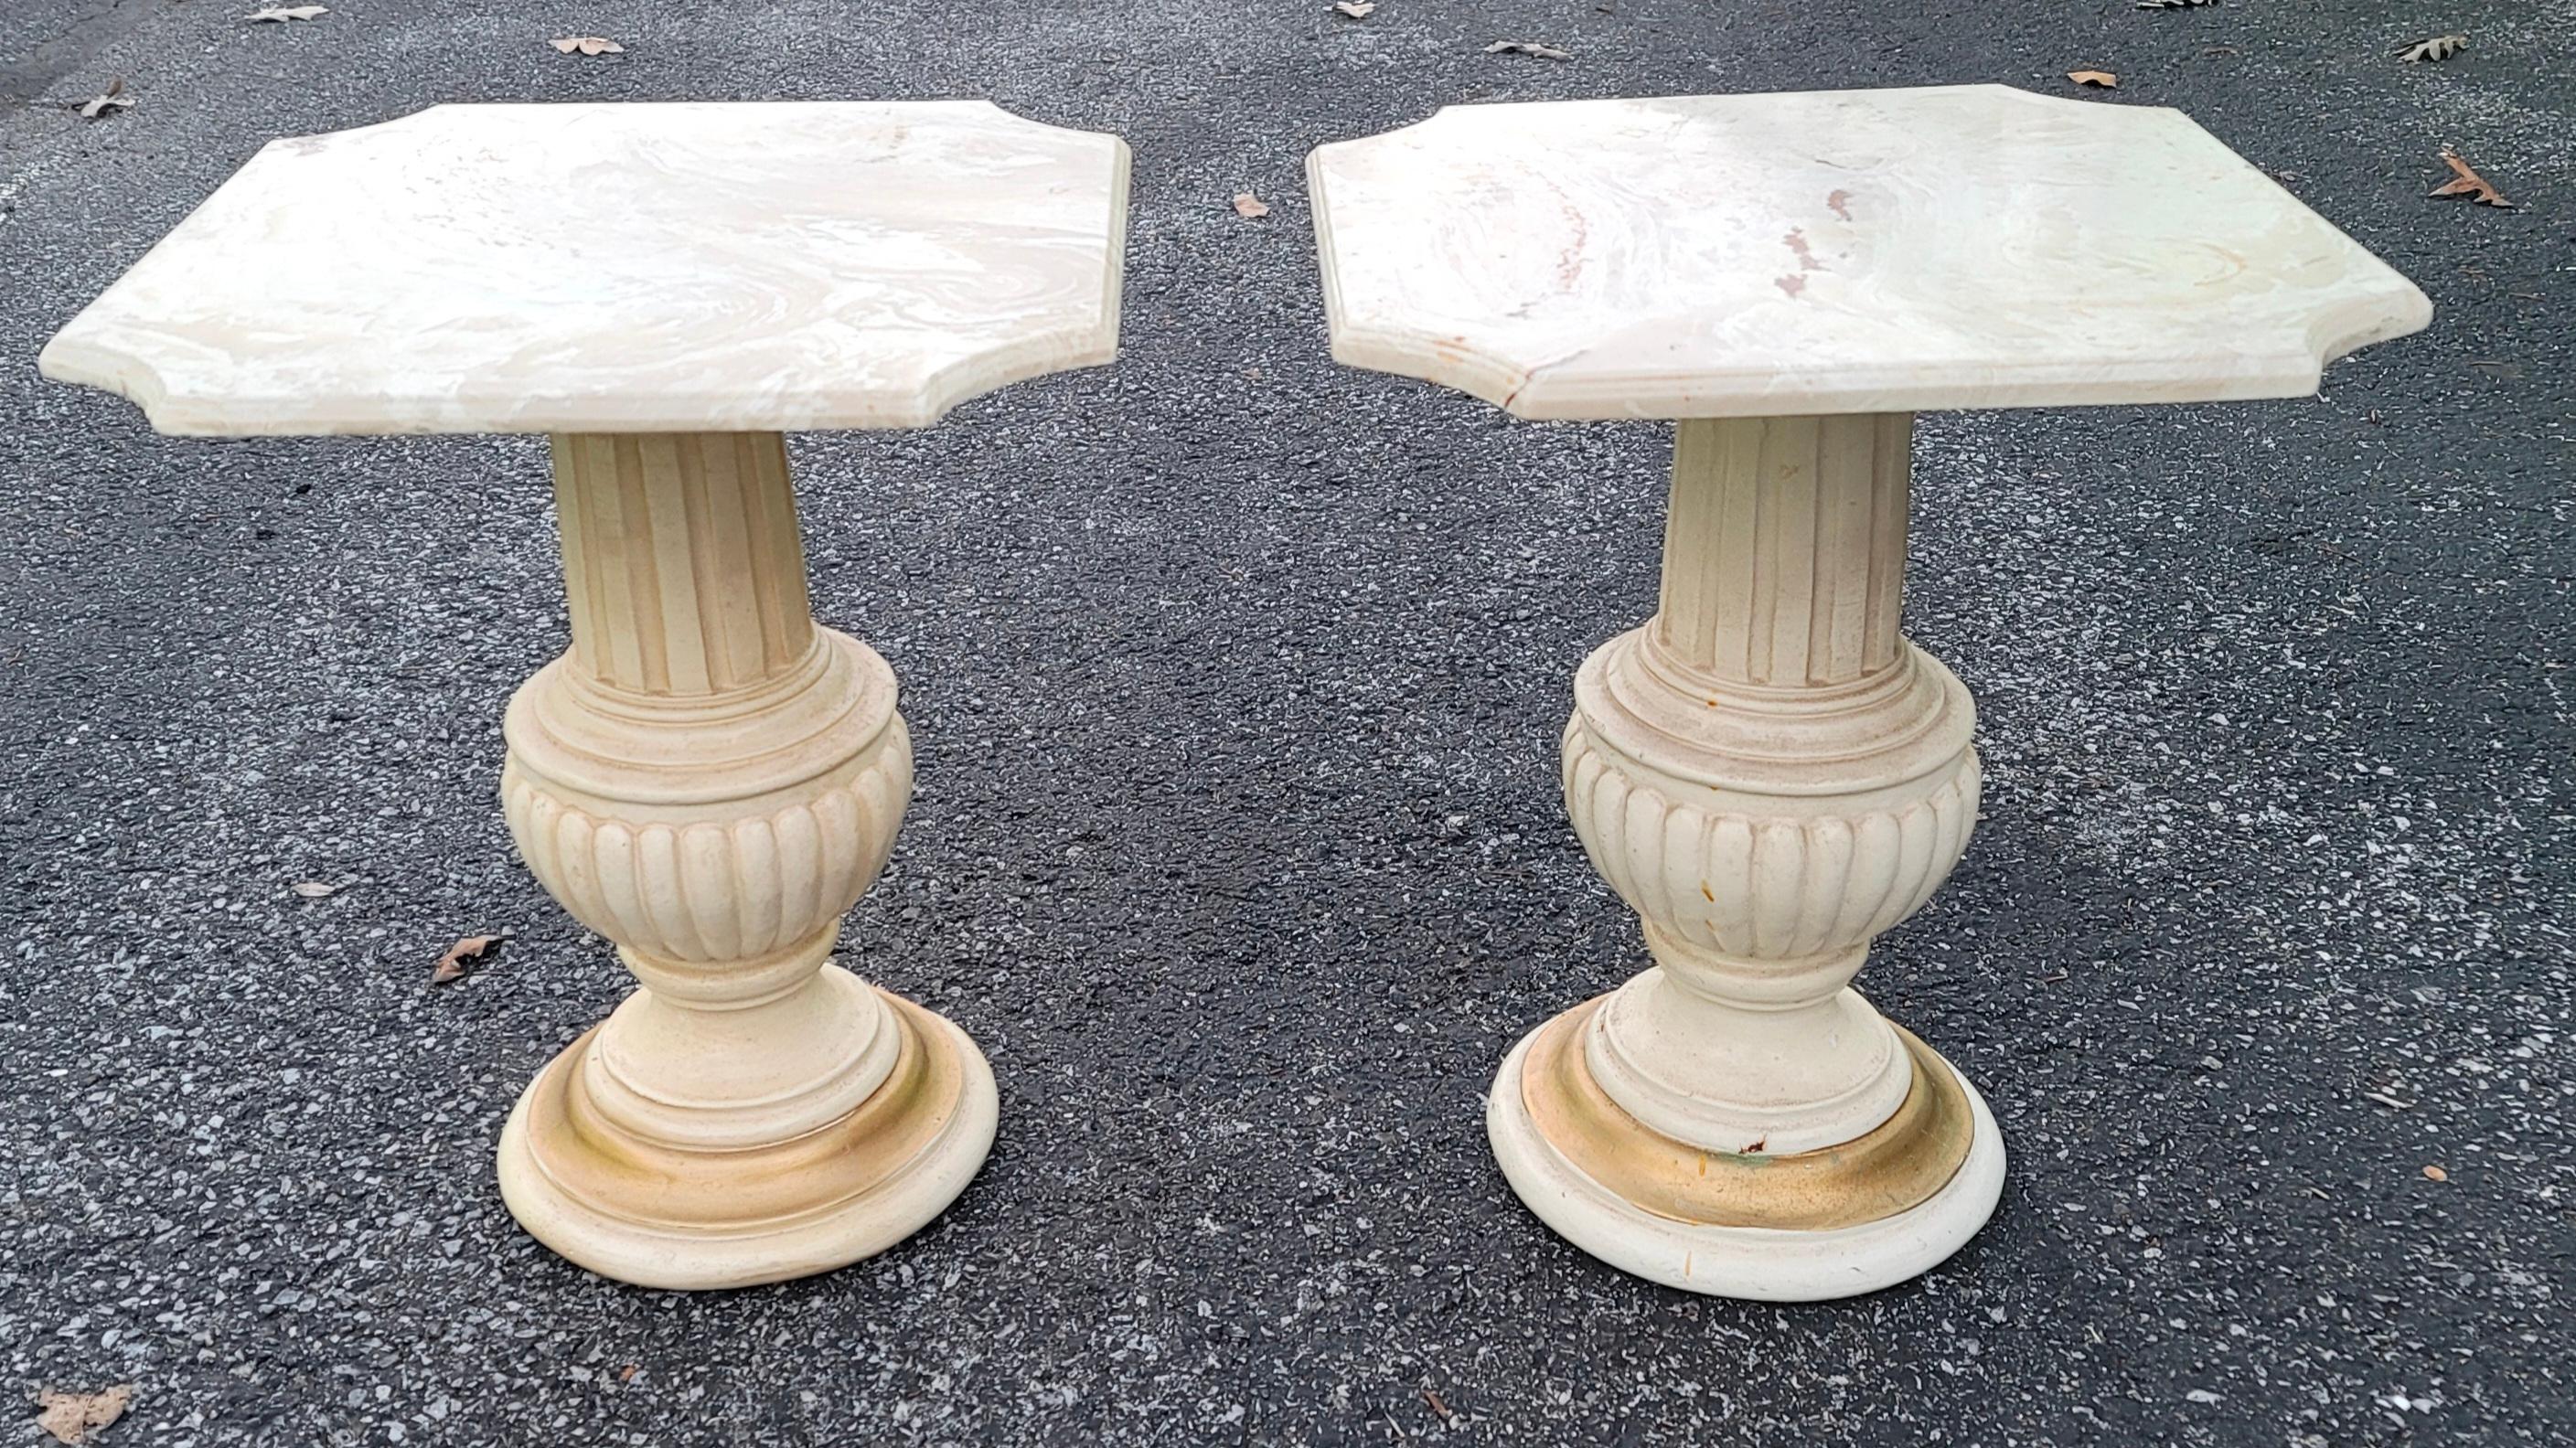 Pair of Vintage Italian Marble Pedestal Side Tables, Circa 1950s In Good Condition For Sale In Germantown, MD